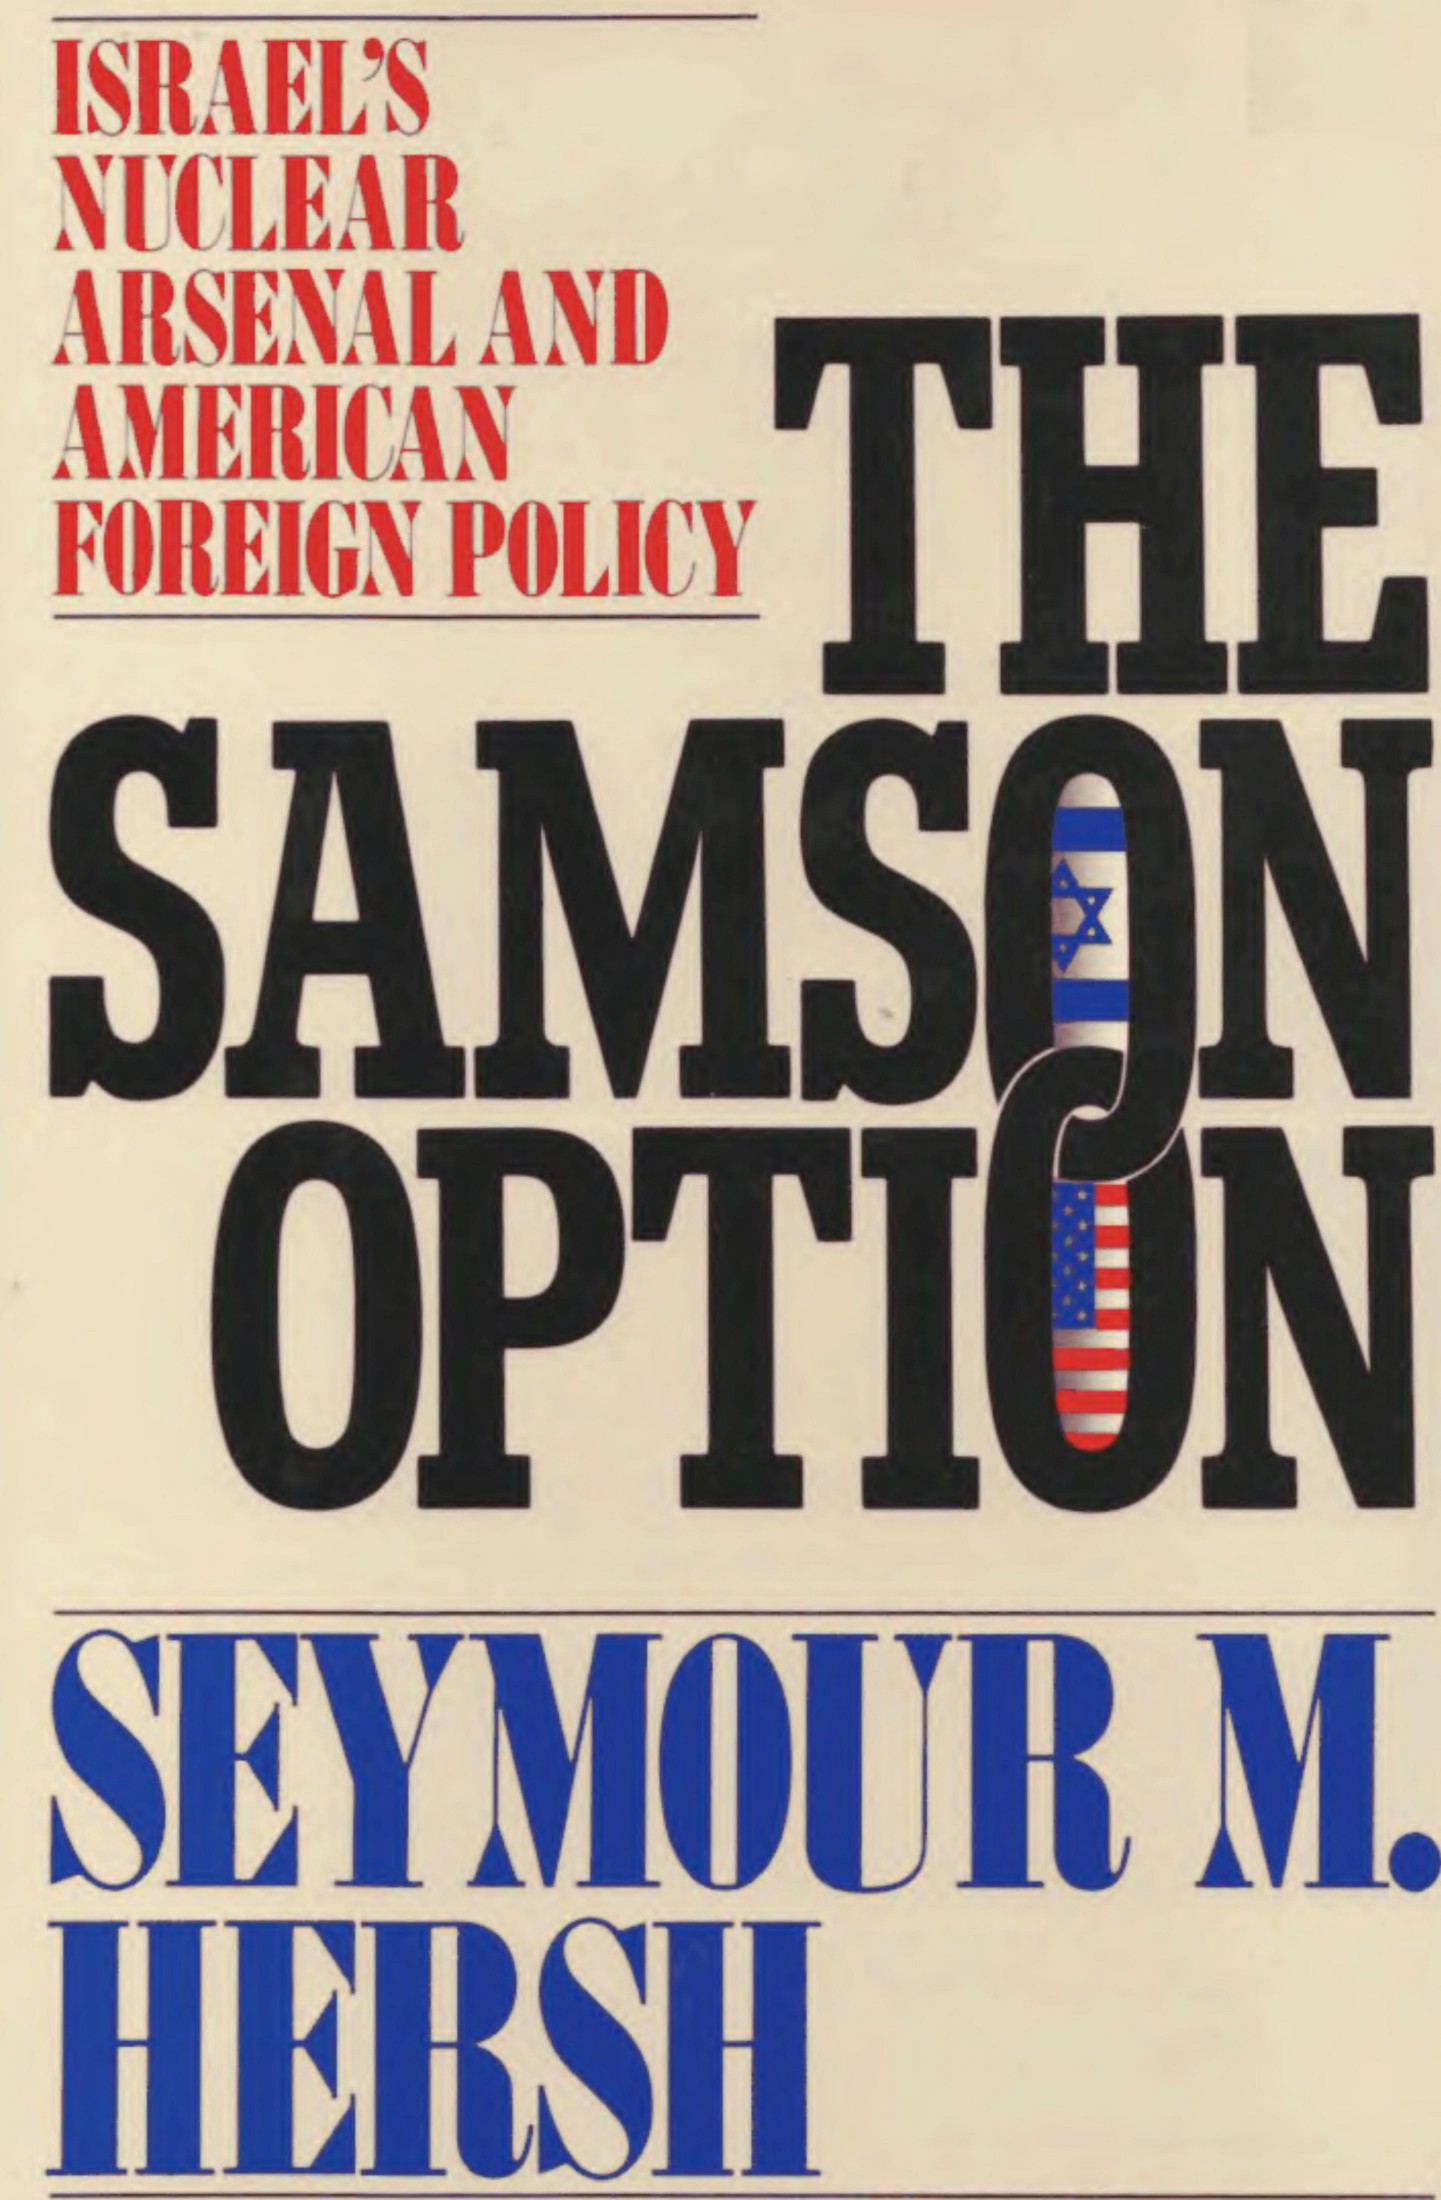 The Samson Option - Israel's Nuclear Arsenal and American Foreign Policy